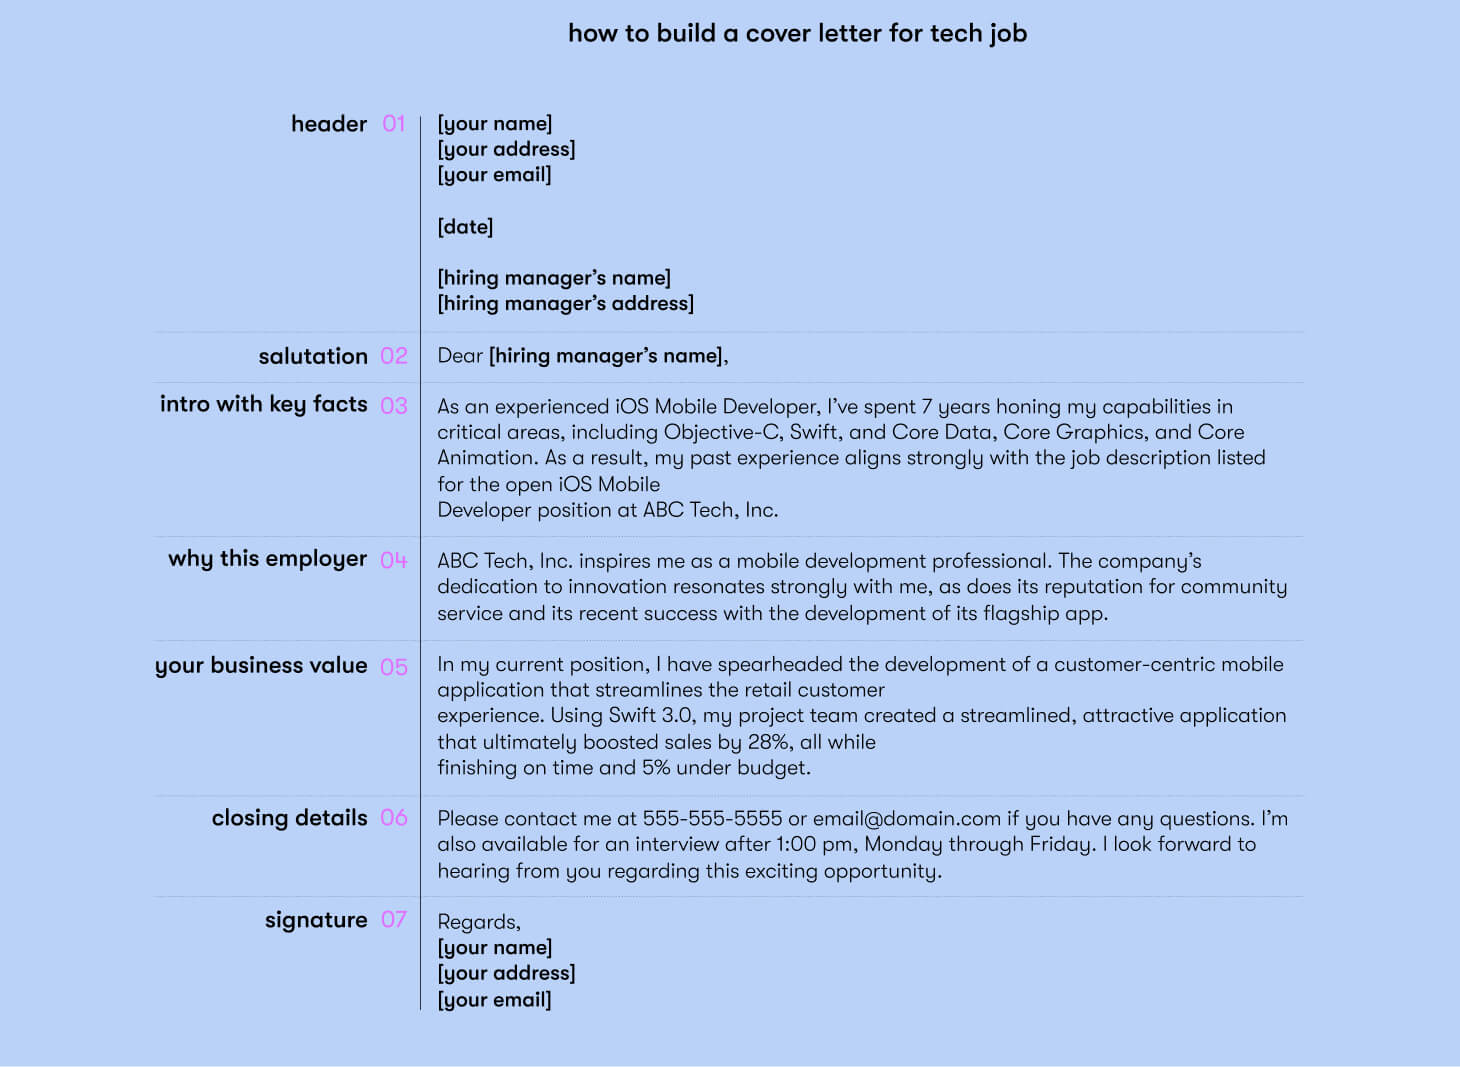 how to build a cover letter for tech jobs